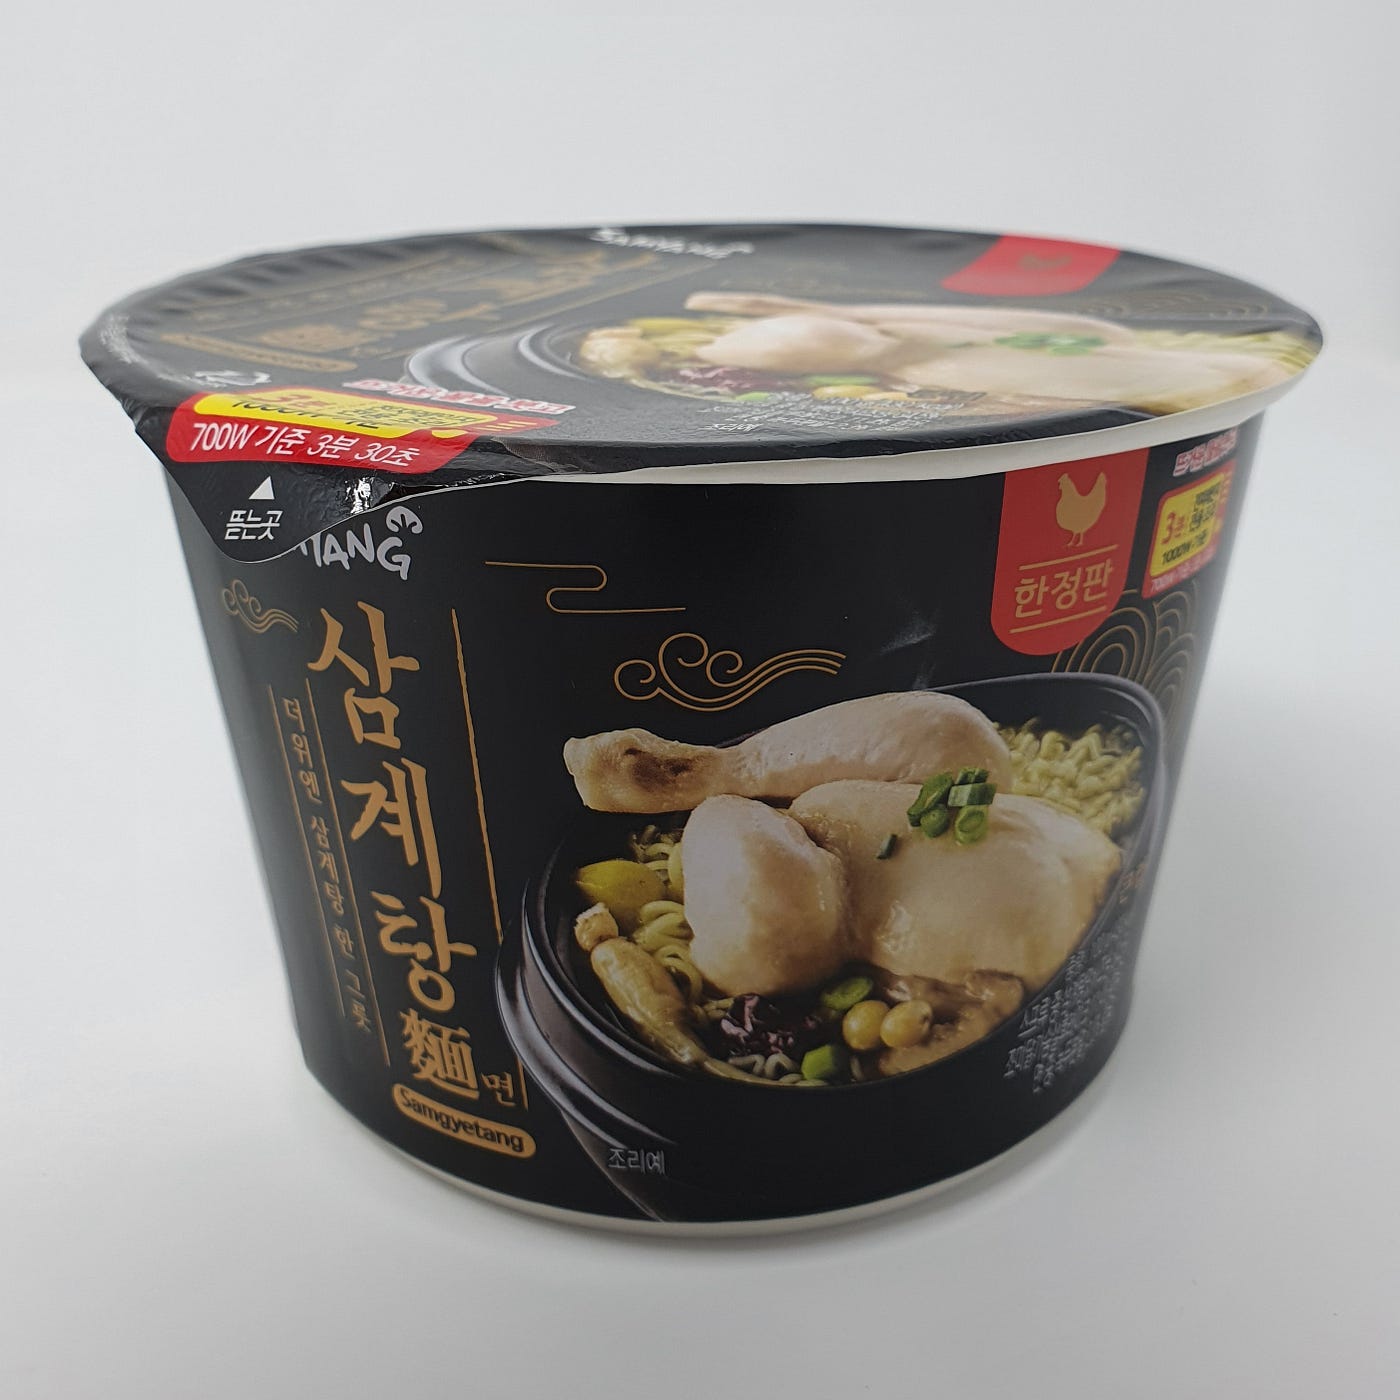 An unopened cup of Samyang Samgyetang Myeon Instant Noodles.